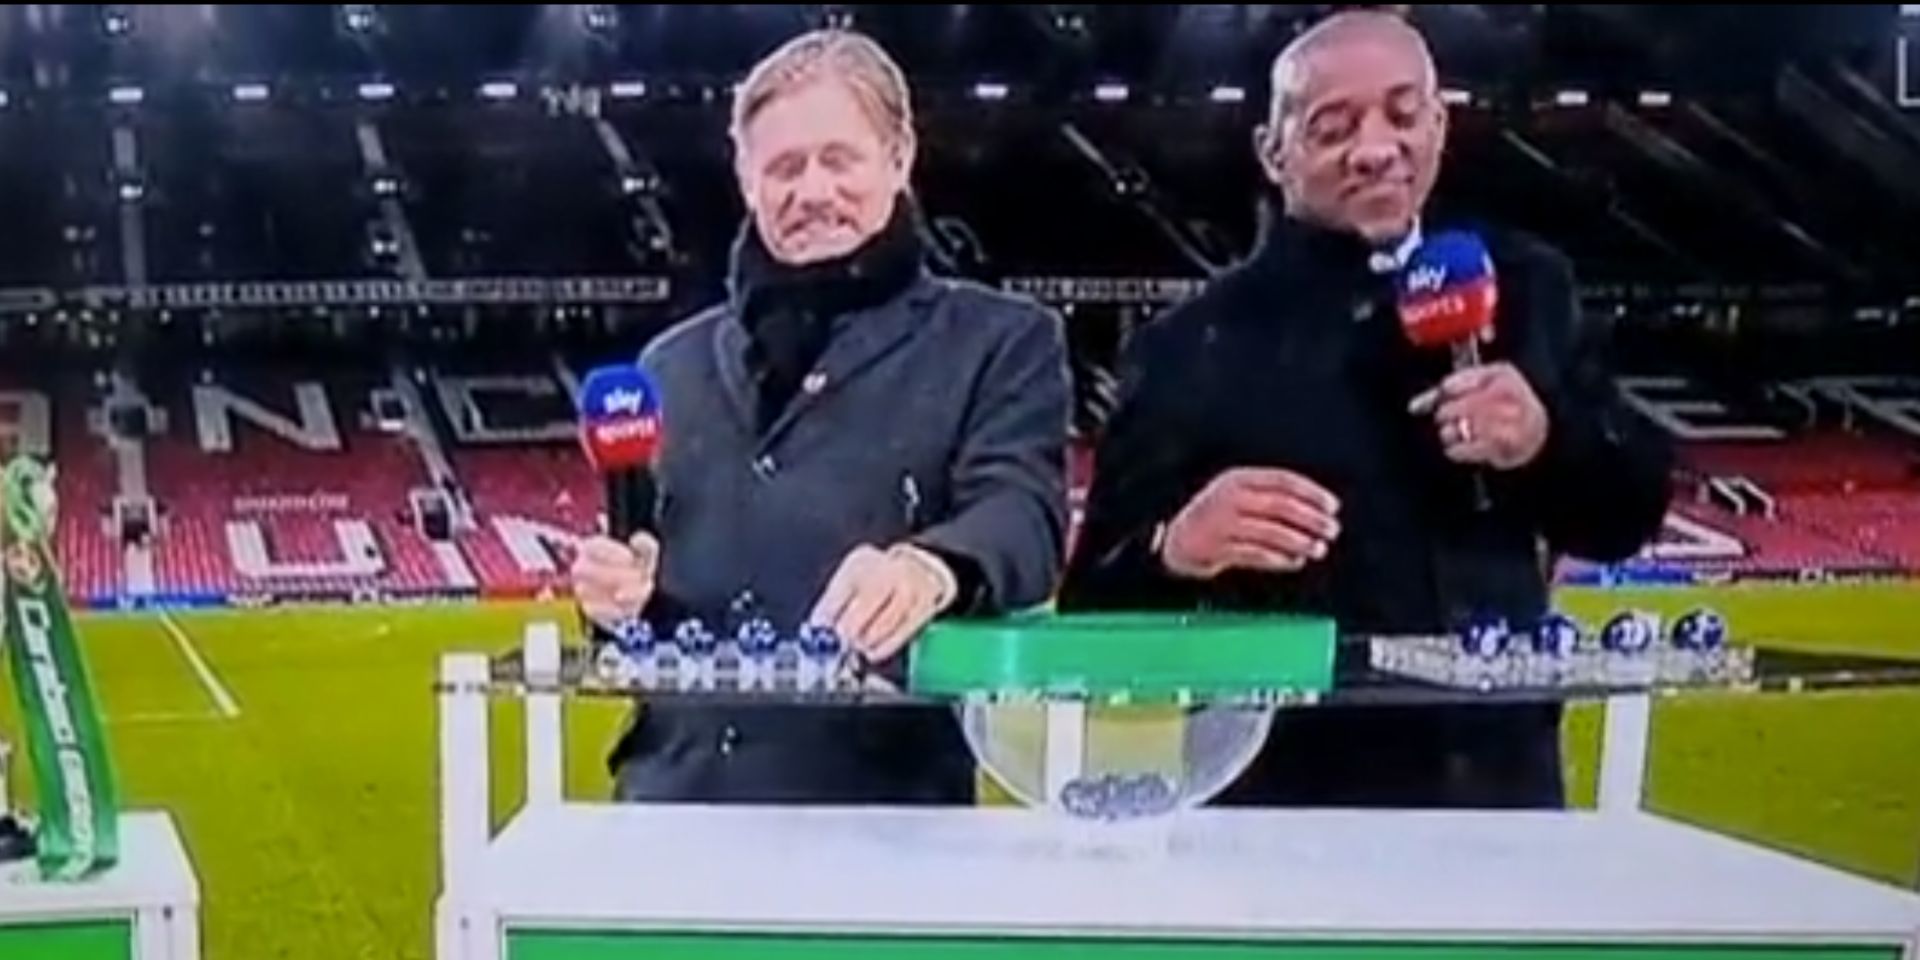 Legitimacy of Schmeichel and Dublin’s Liverpool cup draw questioned by some fans